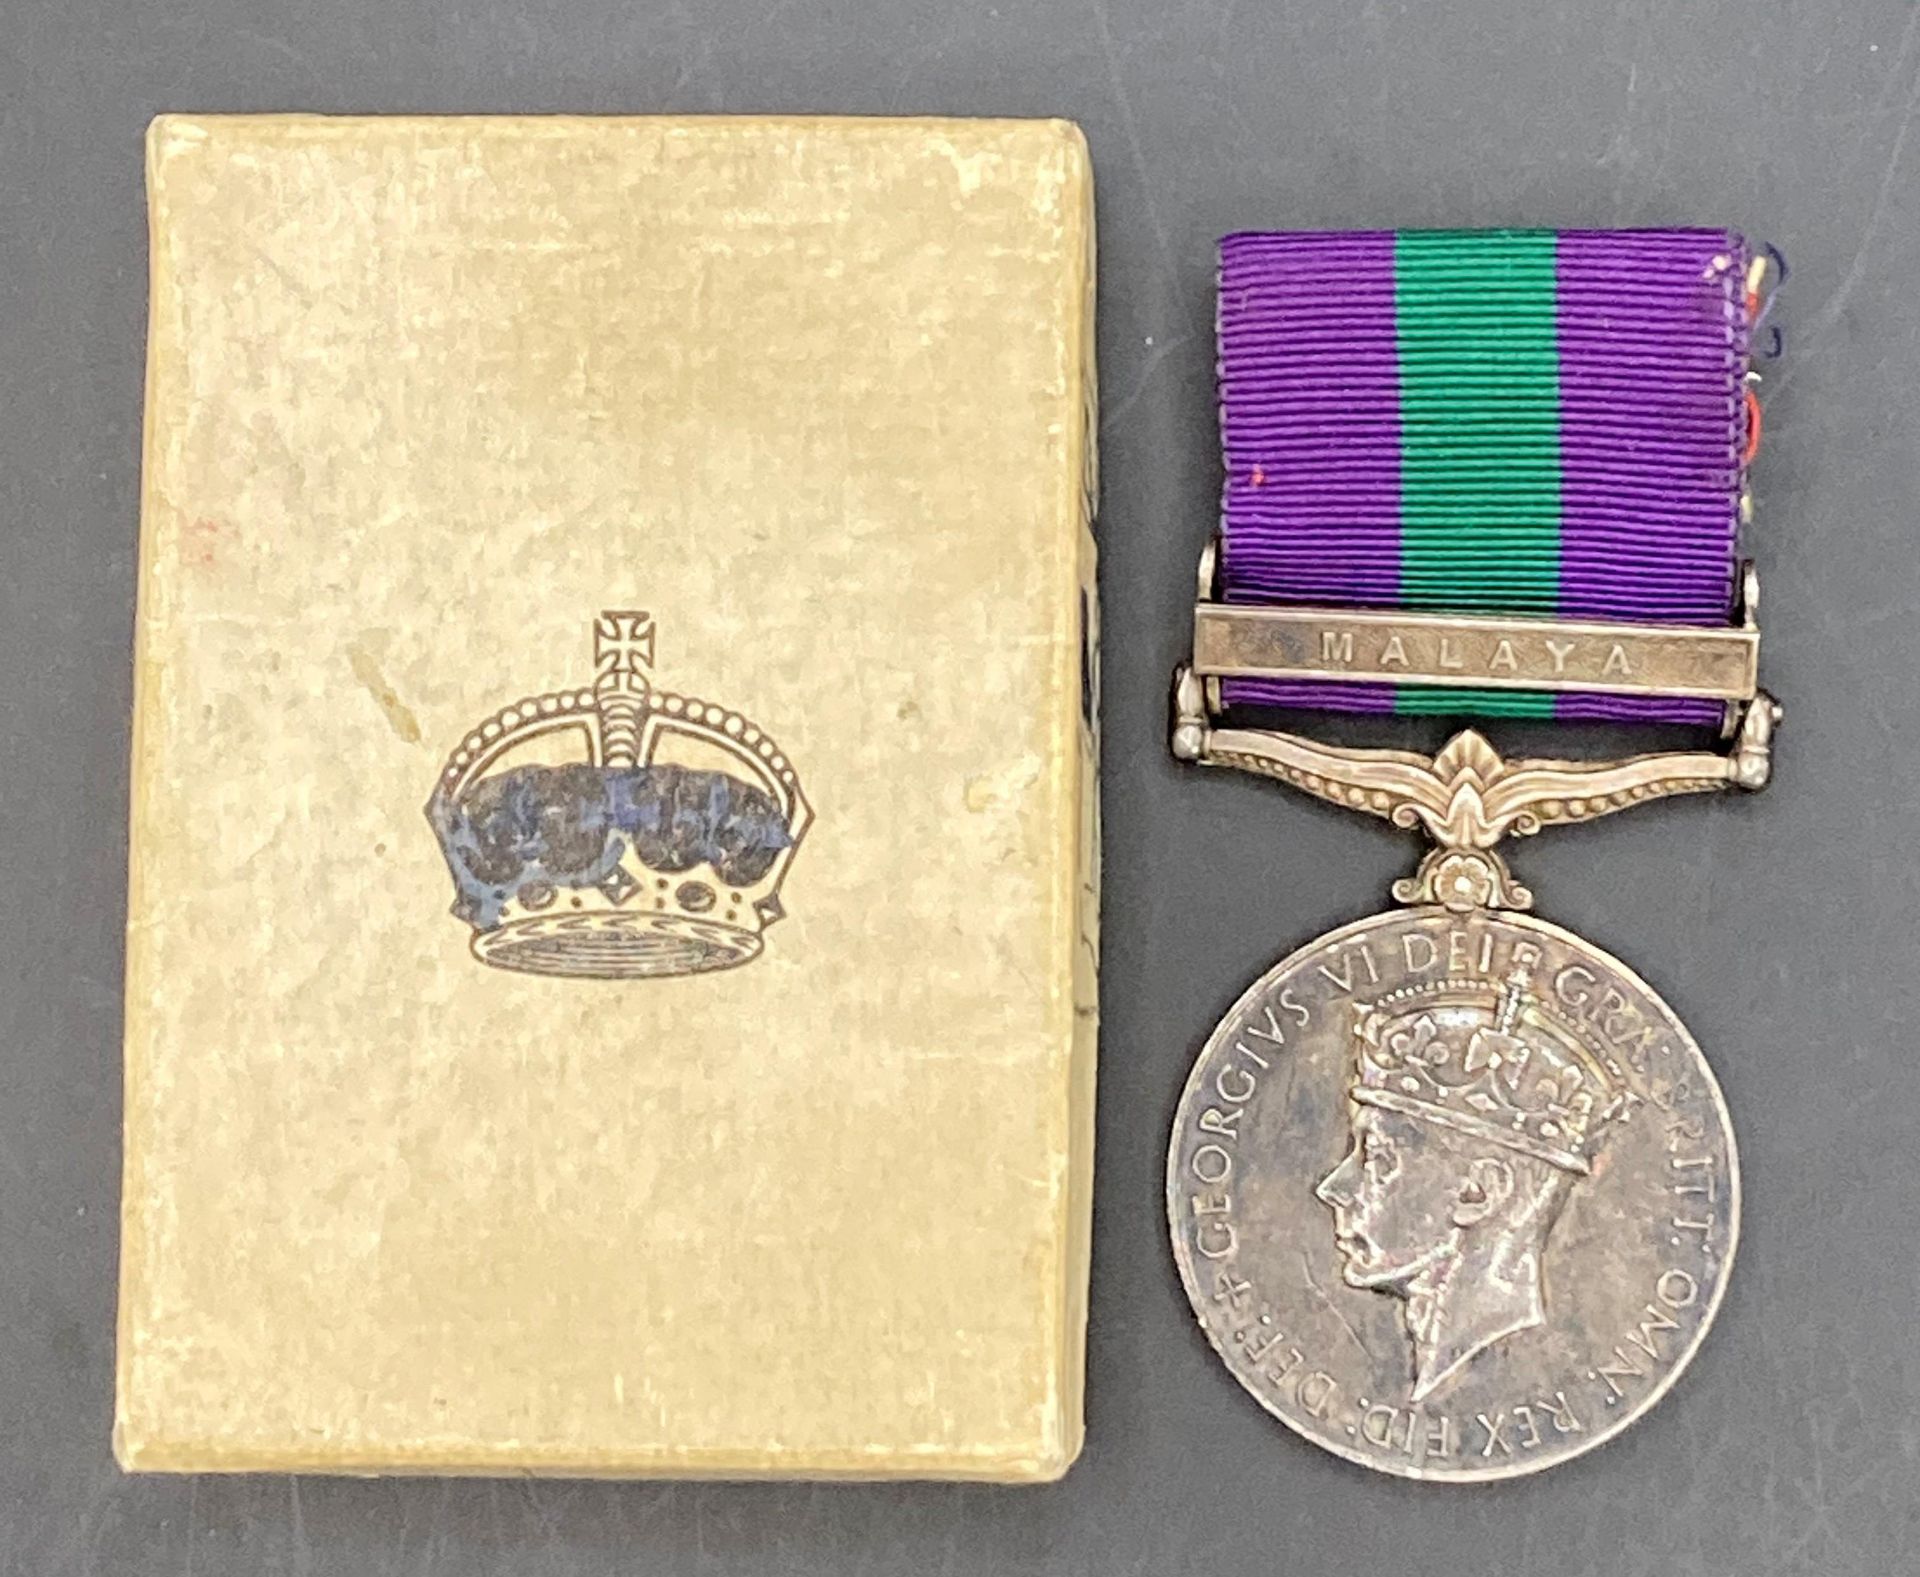 General Service Medal with Malaya clasp and ribbon in box of issue to 21007067 Gdsm R Simpson Coldm